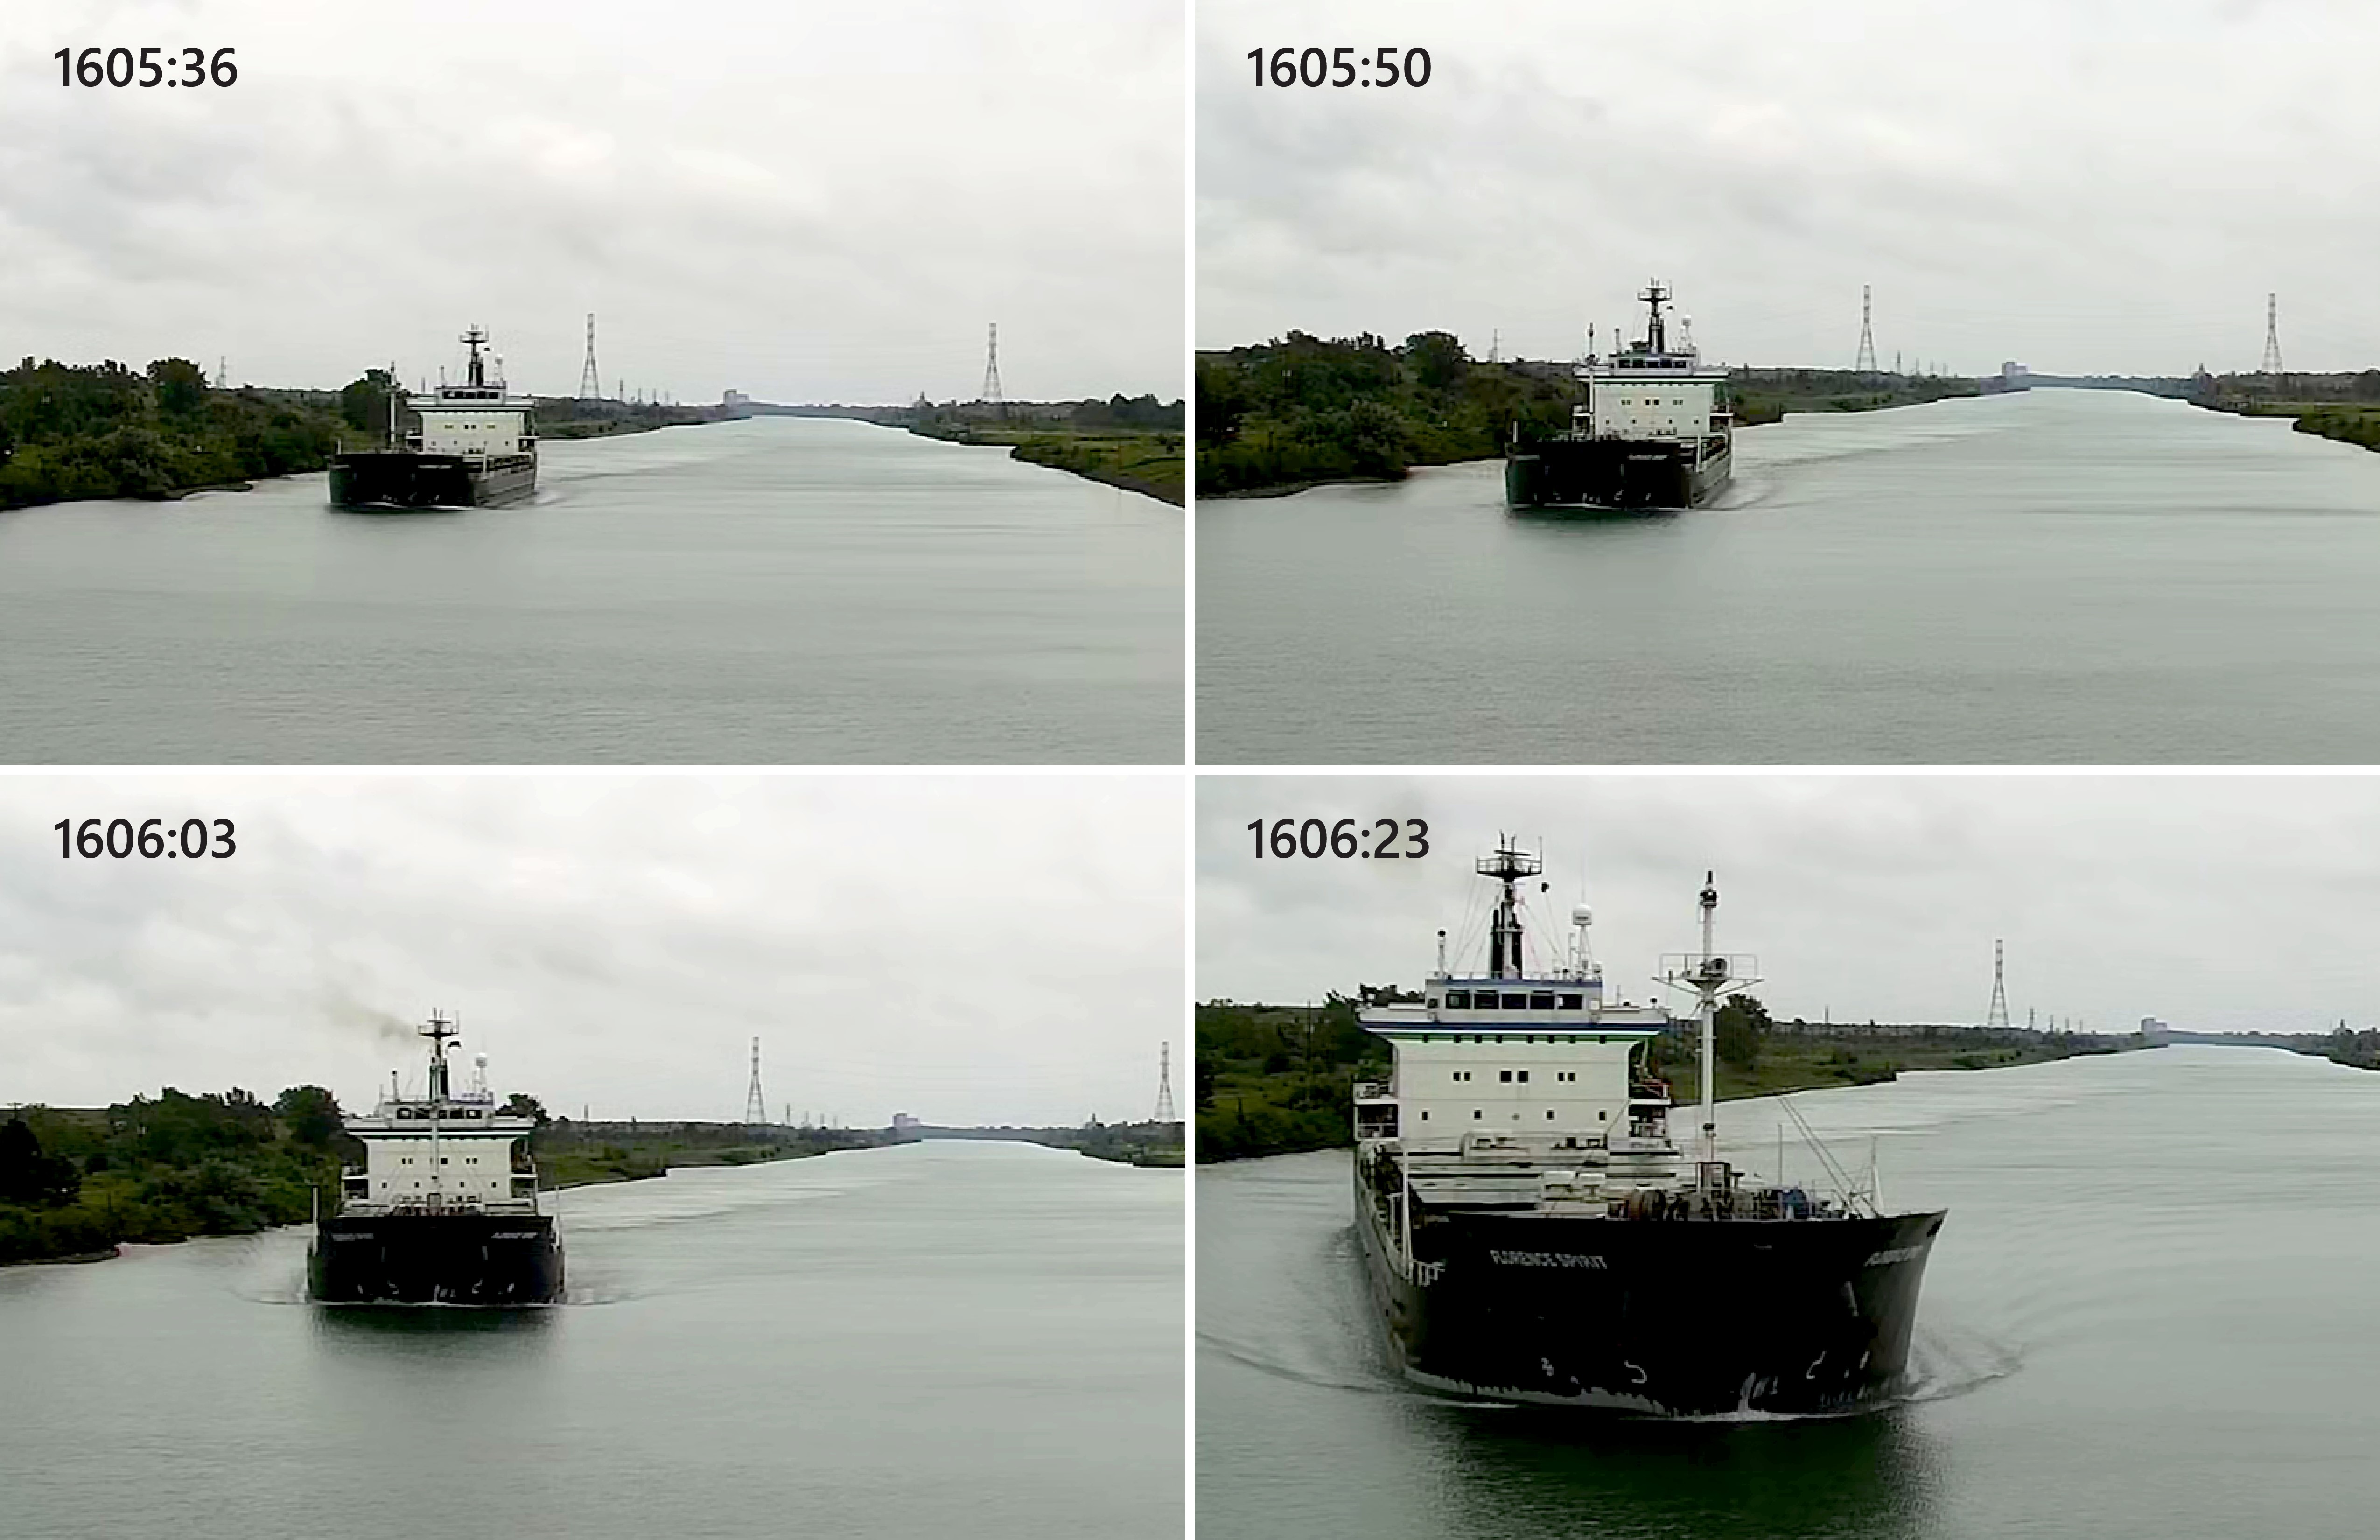 Four images taken prior to the collision, showing the Florence Spirit sheering to port over a period of 47 seconds, as seen from the Alanis (Source: ALANIS / Rambow Bereederungs GmbH & Co. KG)